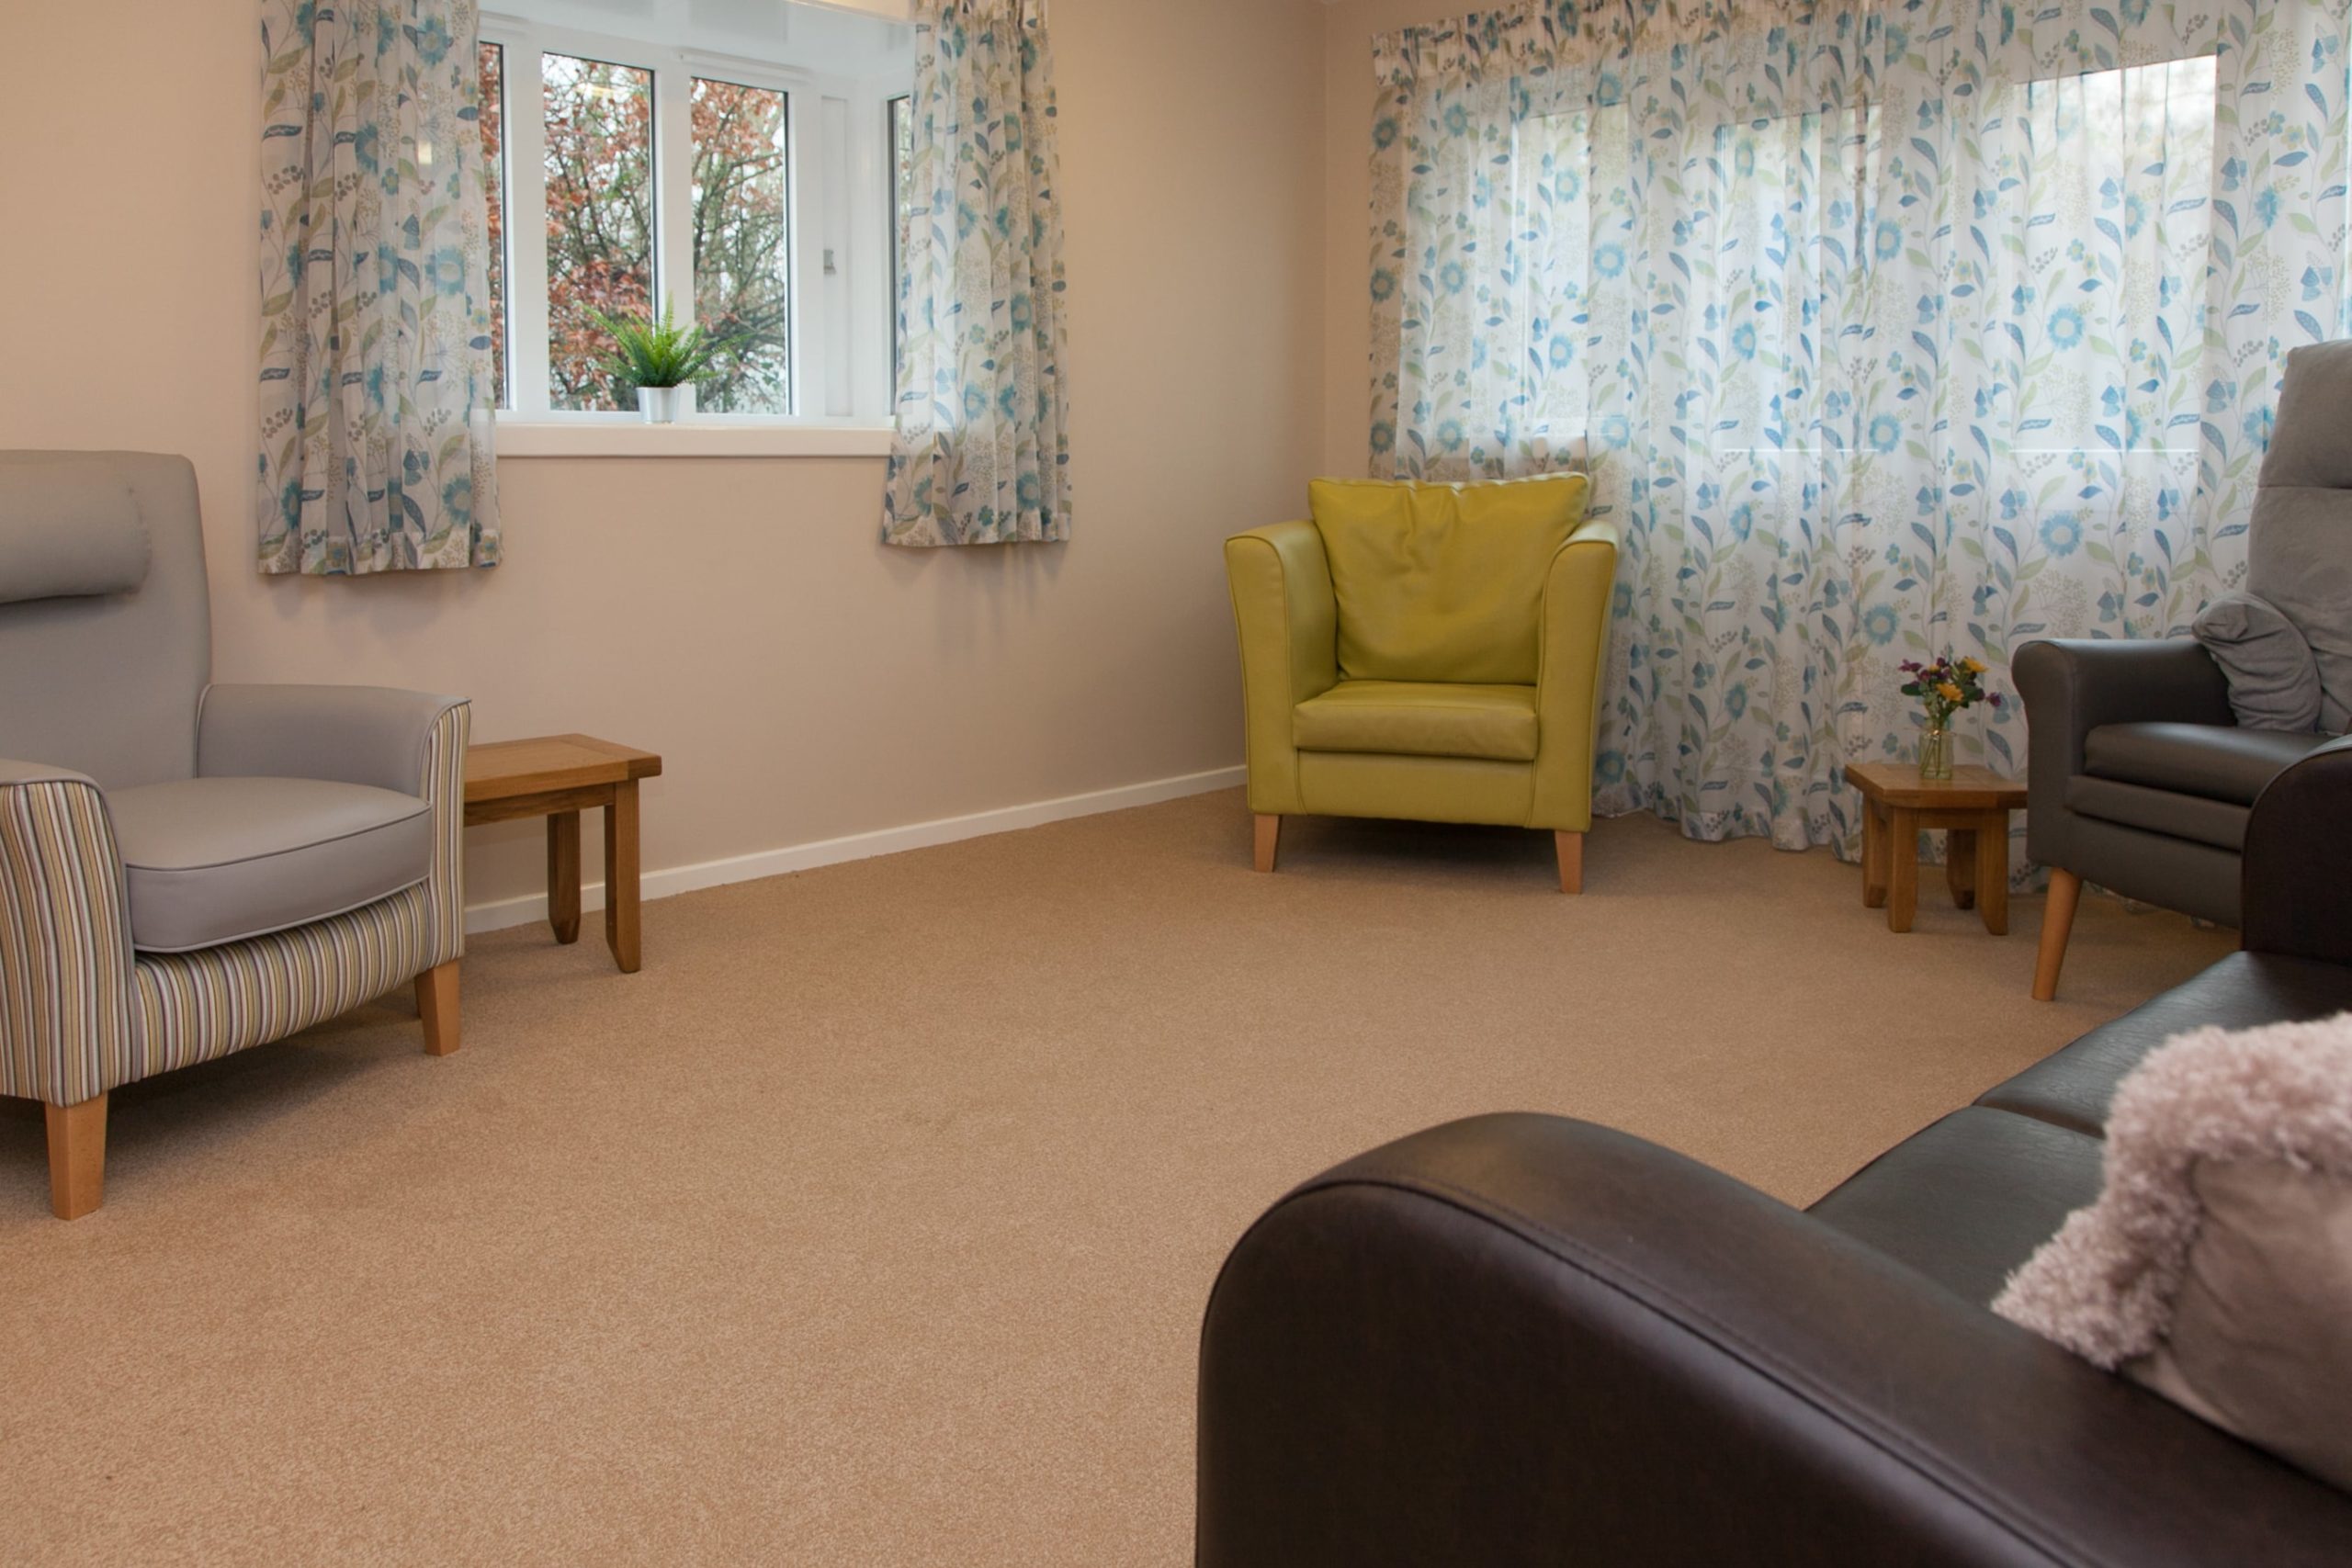 The Support Services Offered by Our Residential Care Homes